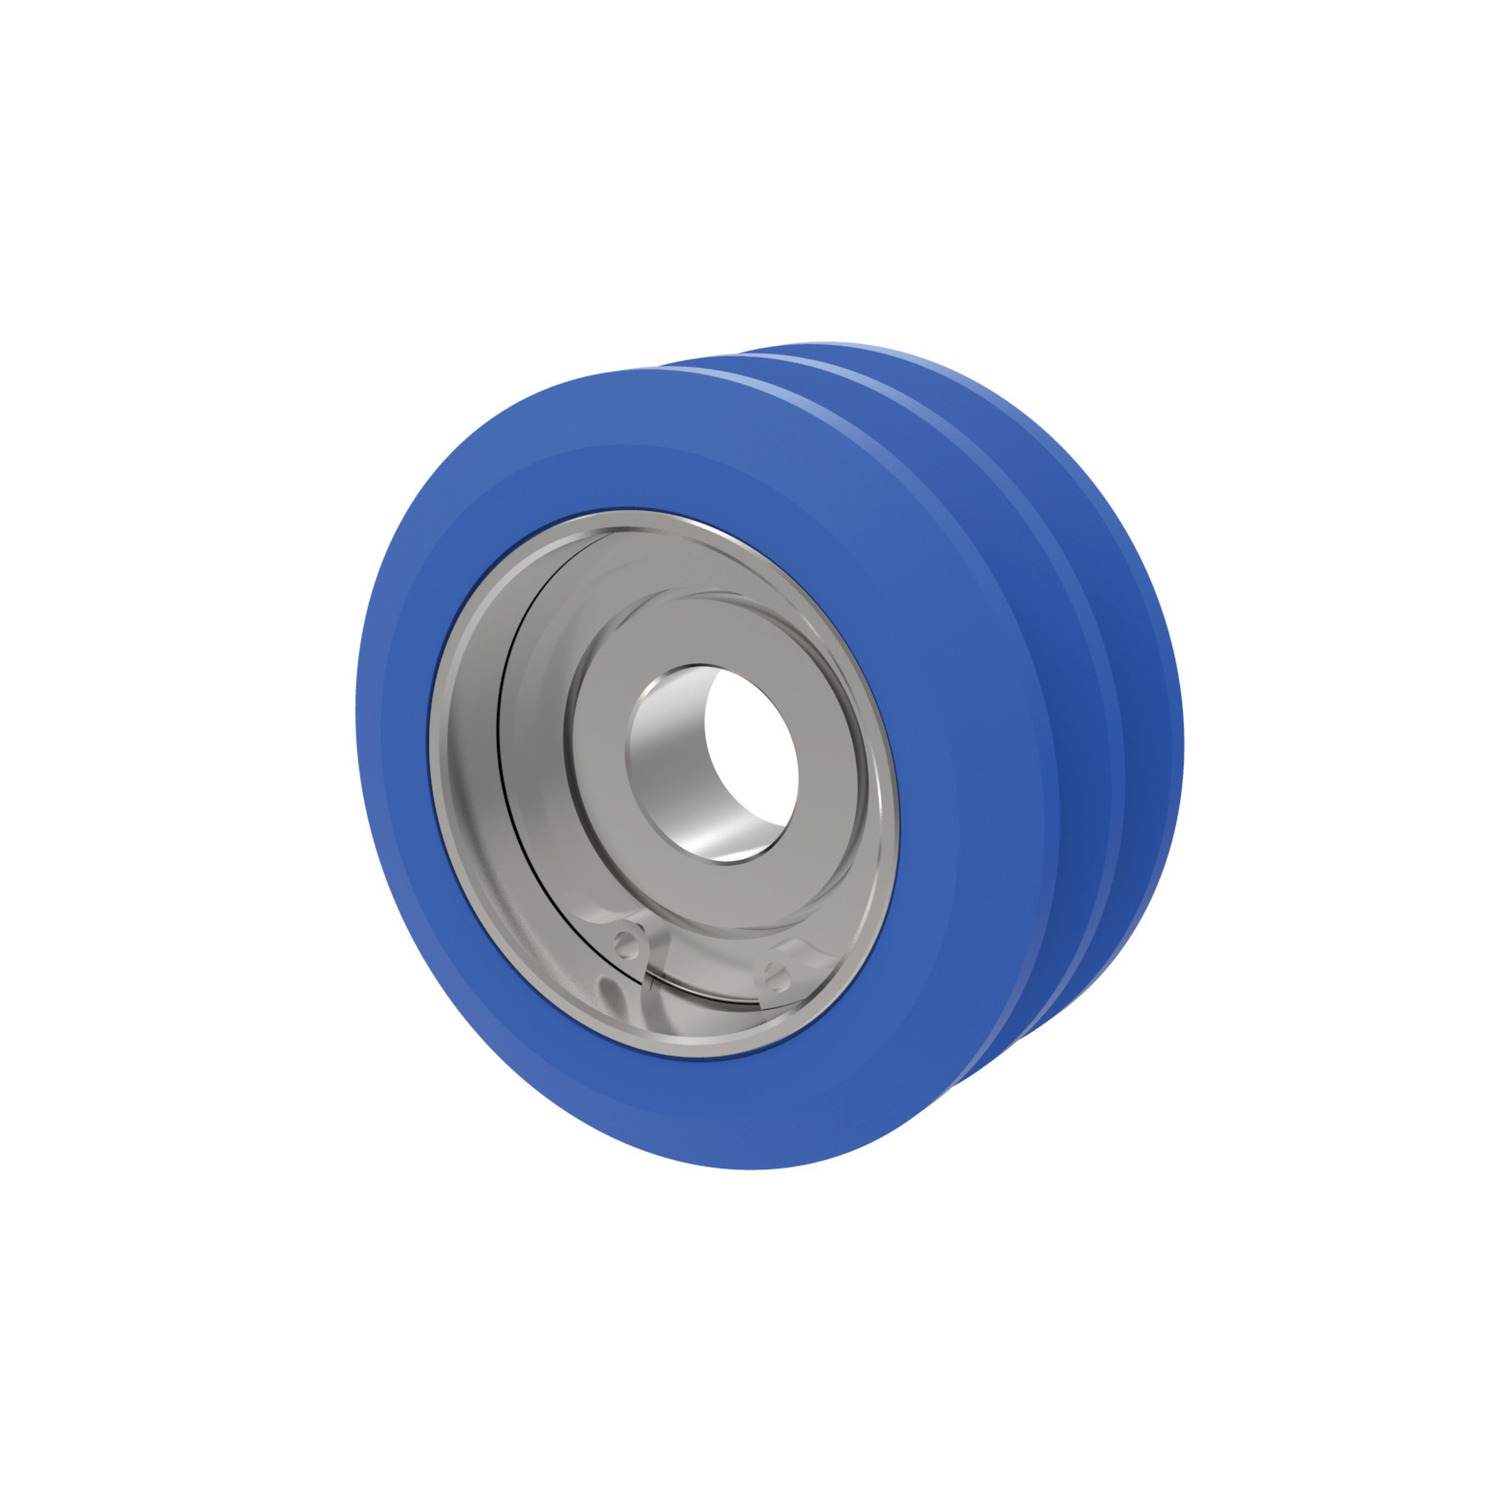 Product 60682, Finned Roller bearing mount / 